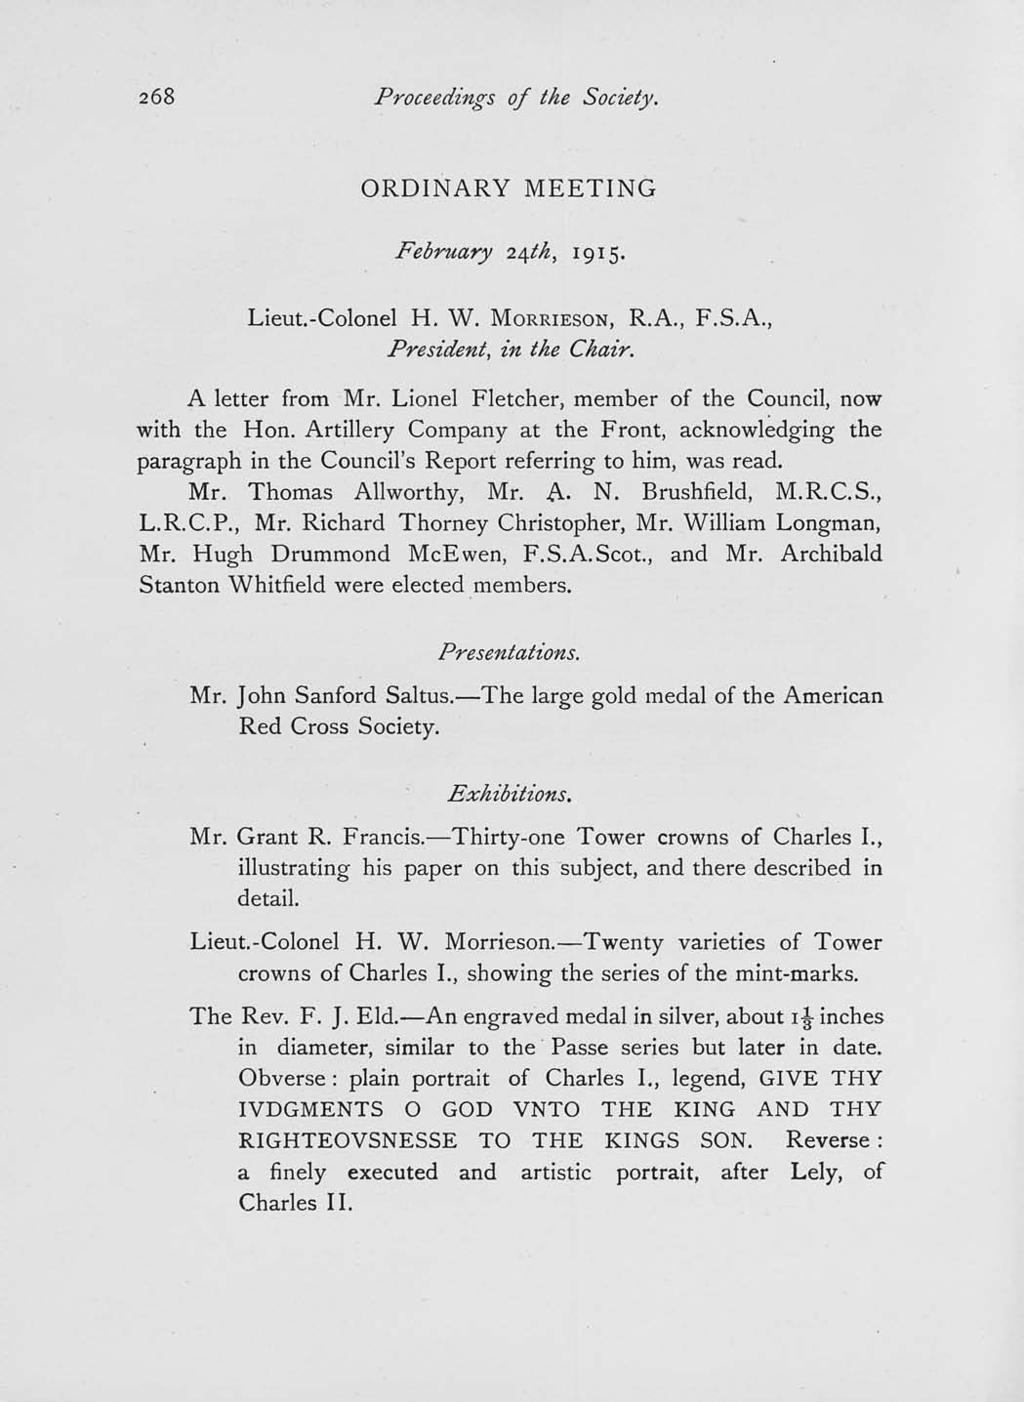 268 Proceedings of the Society. ORDINARY MEETING February 24th, 1915. Lieut.-Colonel H. W. MORRIESON, R.A., F.S.A., President, in the Chair. A letter from Mr.